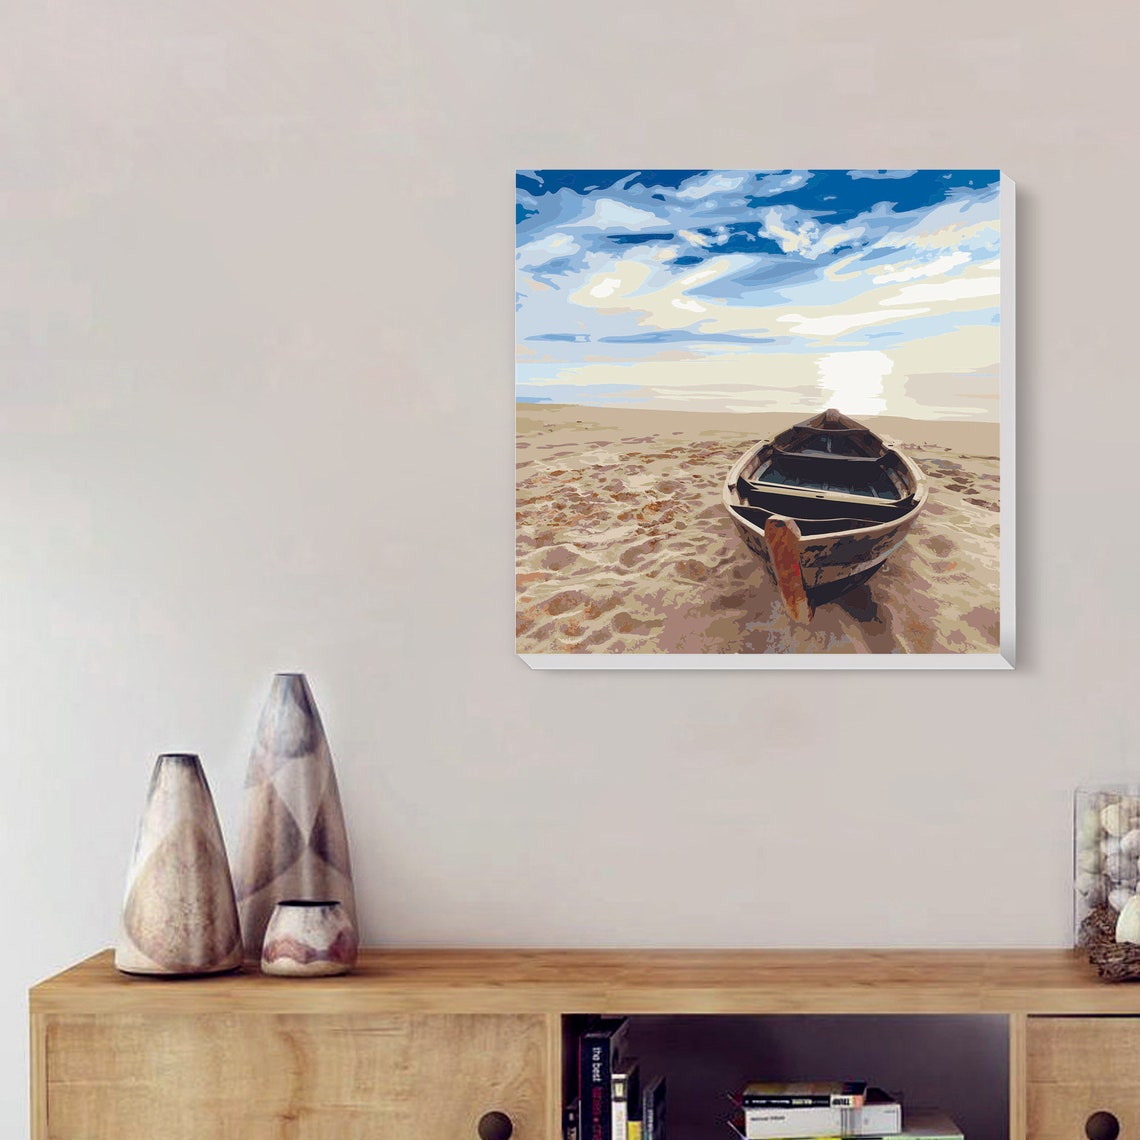 Boat on Beach - Paint by Number Kit DIY Oil Painting Kit on Wood Stretched Canvas 14"x14"